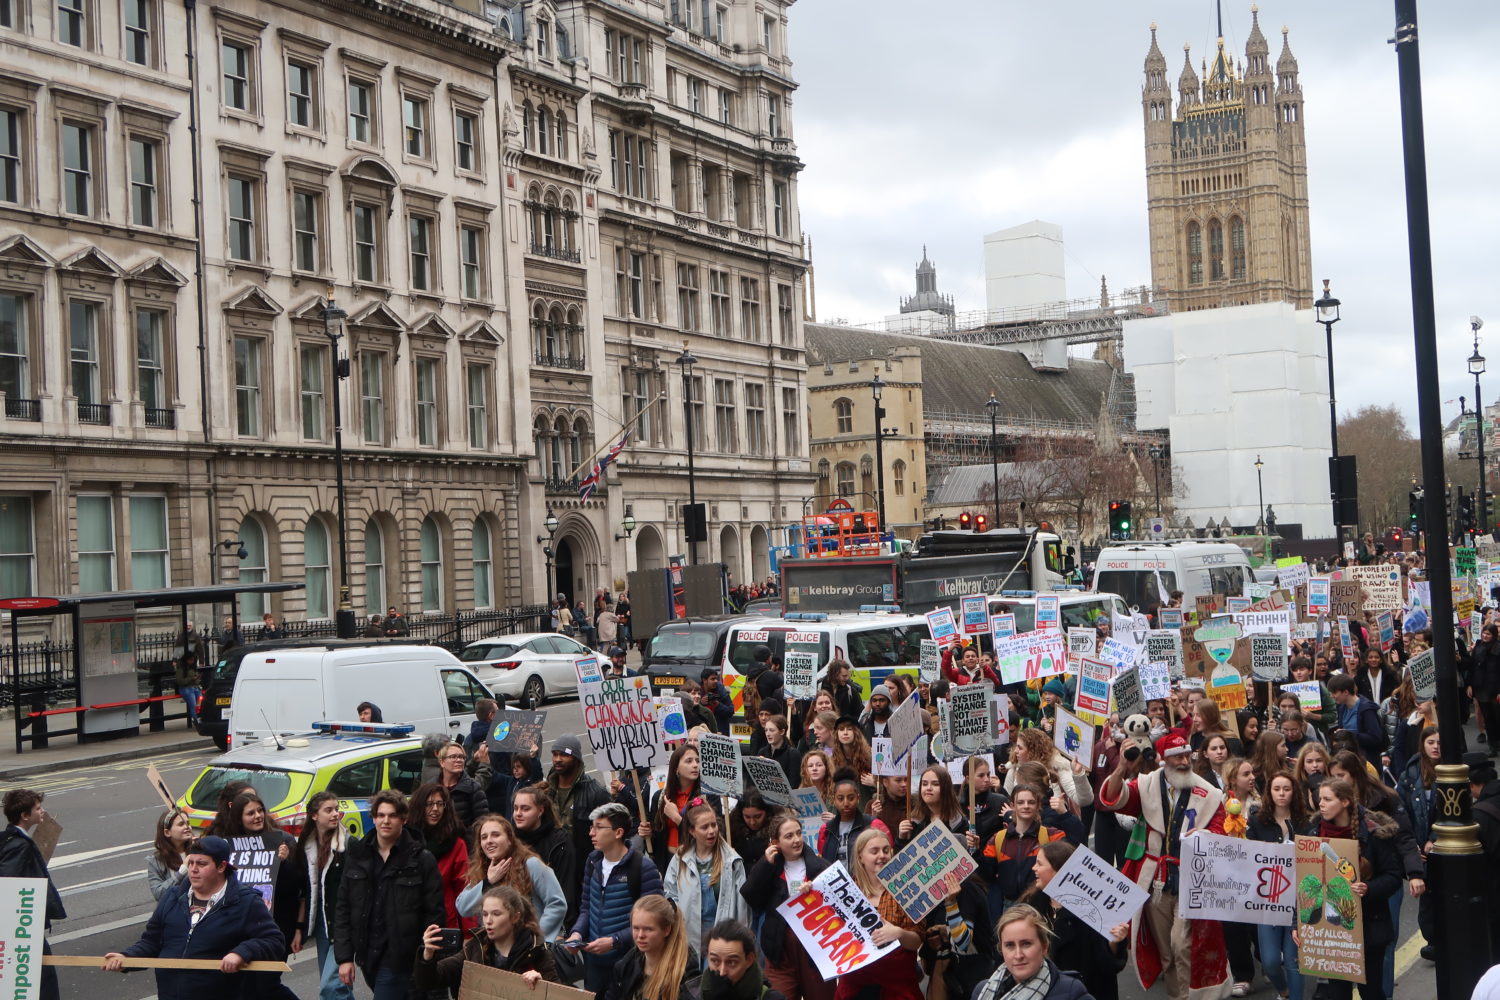 Young people marching on the streets of London for the climate